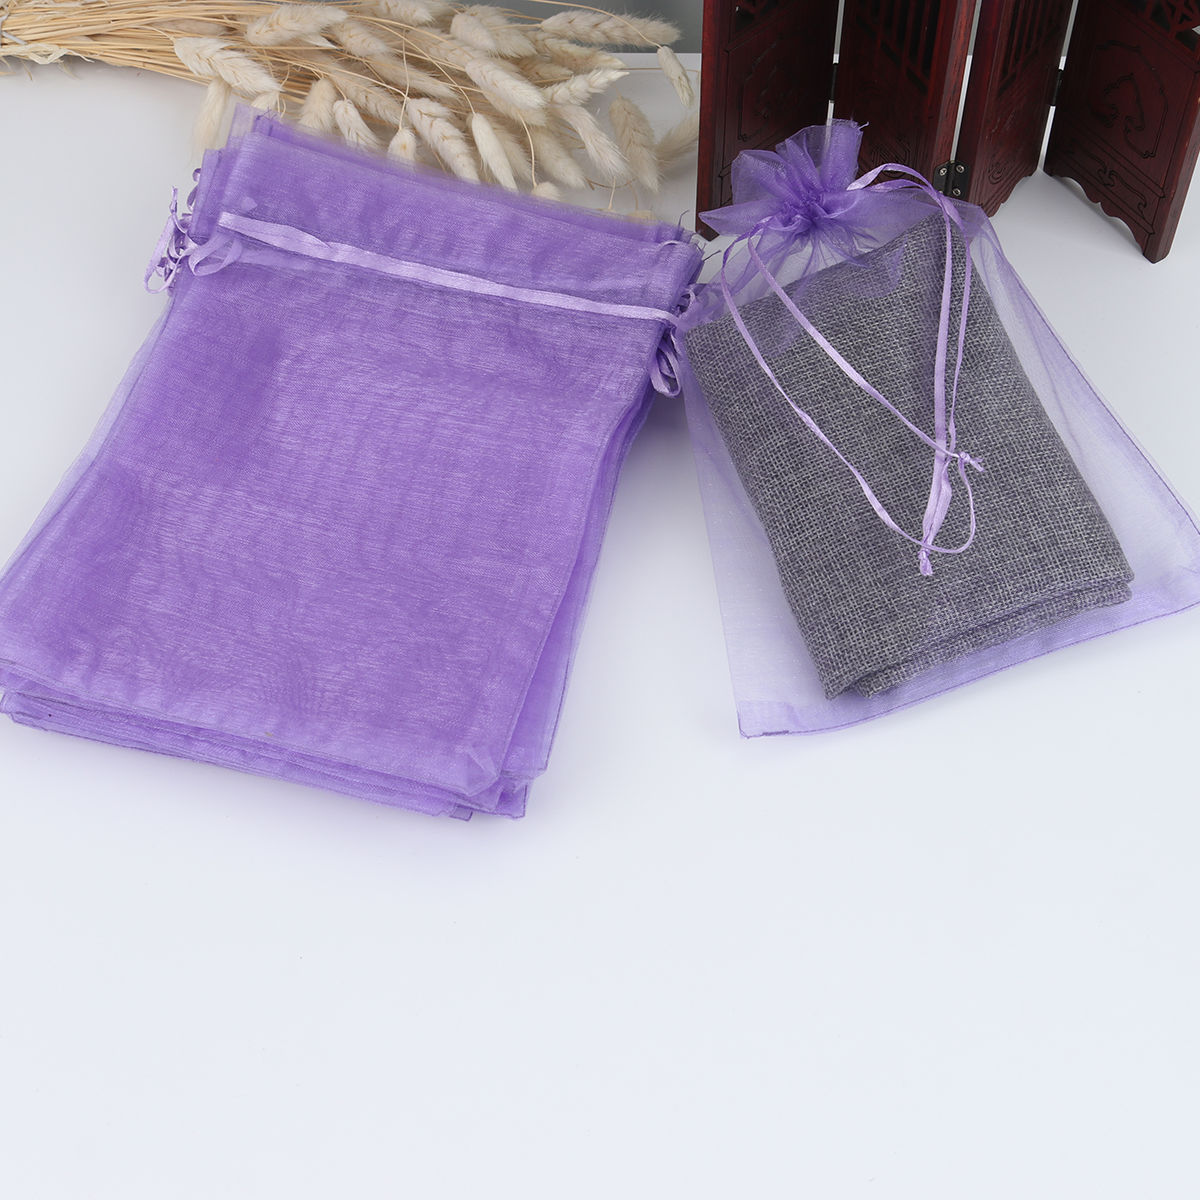 Picture of Wedding Gift Organza Jewelry Bags Drawstring Rectangle Purple (Usable Space: 19x16.5cm) 23cm x 17cm, 20 PCs